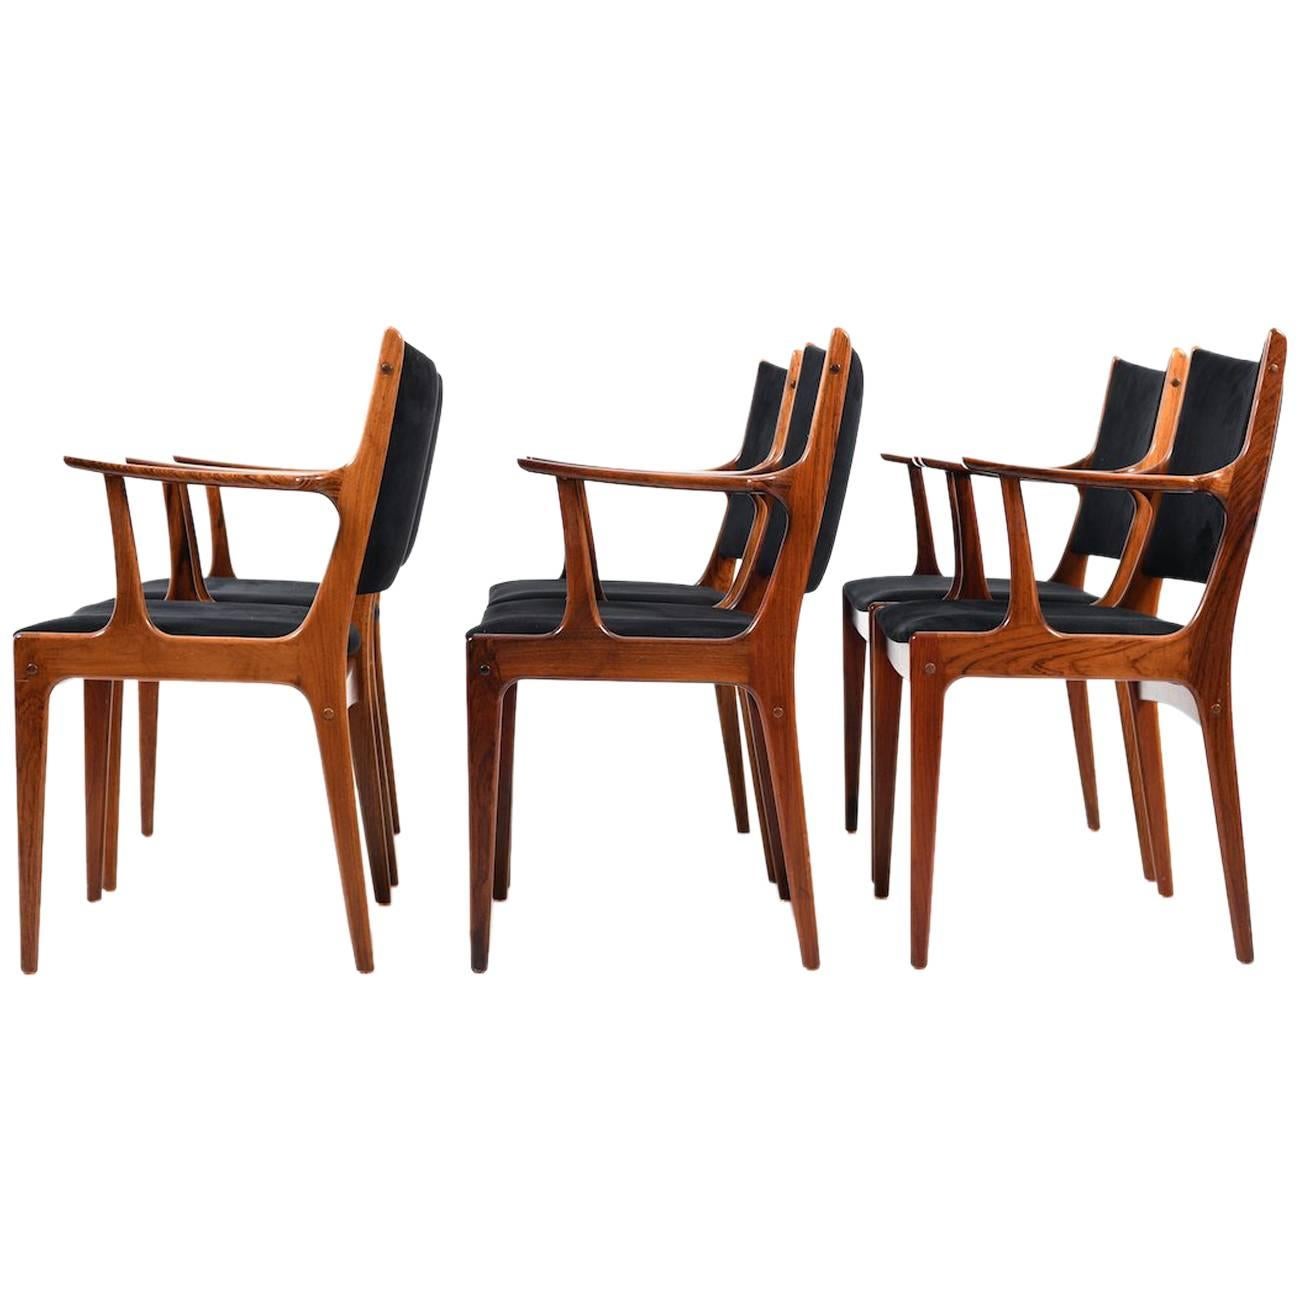 Set of Six Dining Chairs in Rosewood by Johannes Andersen for Uldum Møbelfabrik